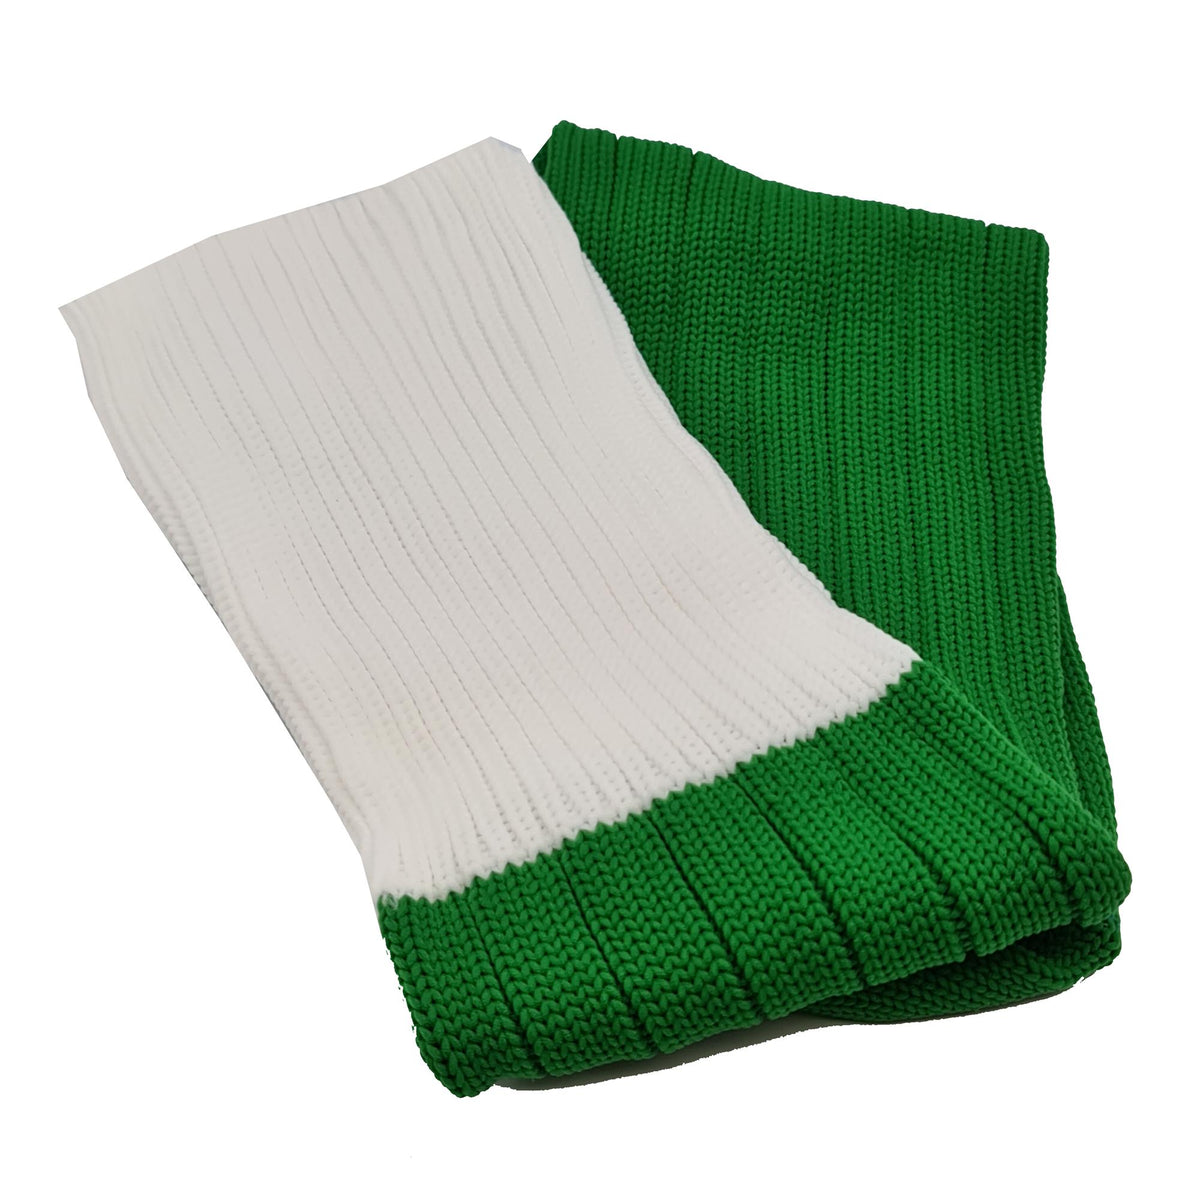 Contrast Top Football Rugby Premium Socks - Made In UK - GREEN/WHITE - MENS ( UK 6-8)